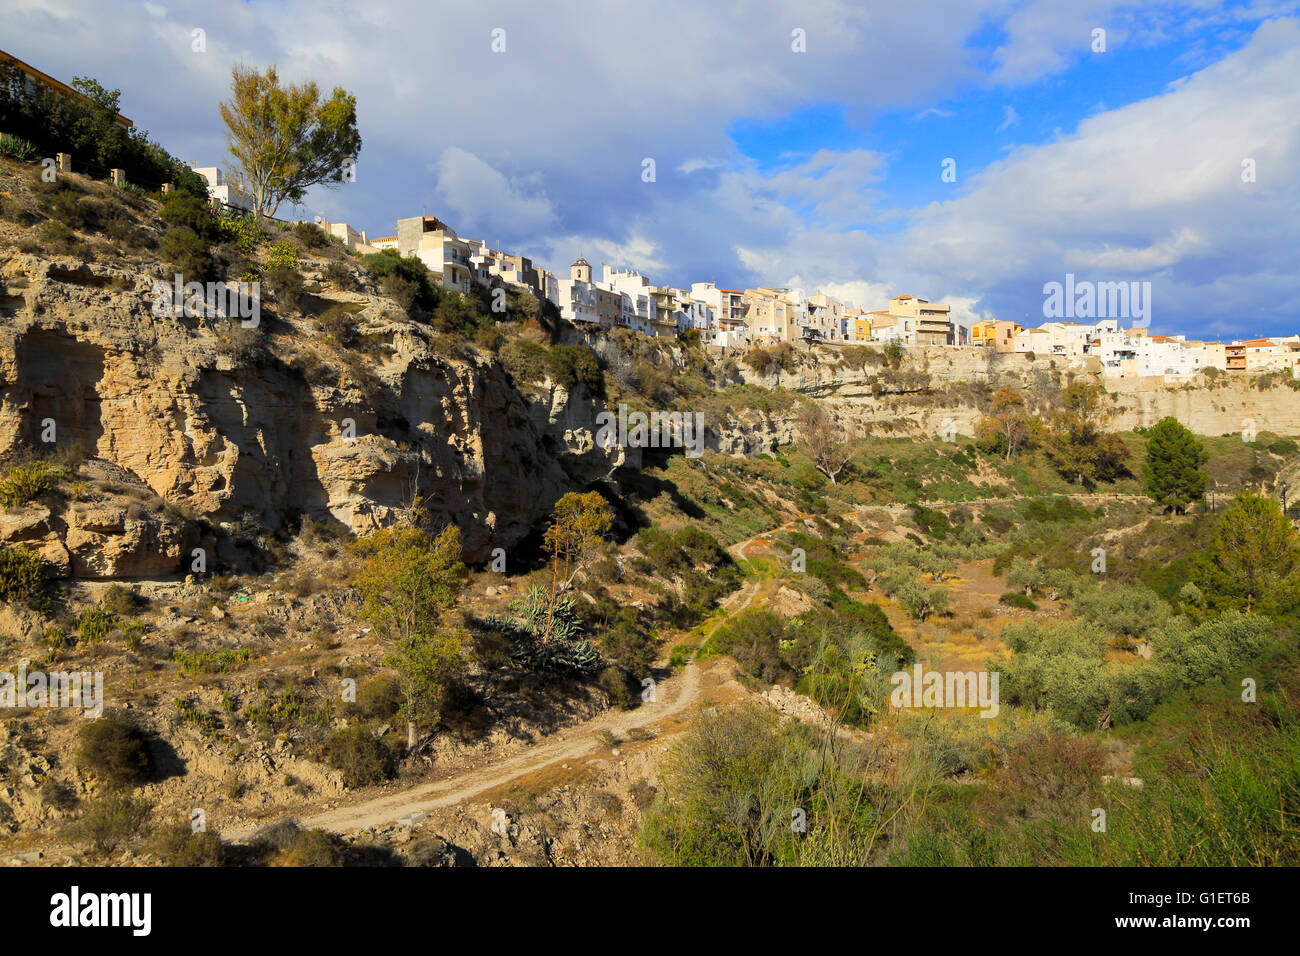 Buildings perched on edge of cliff top, Sorbas, Almeria, Spain Stock Photo